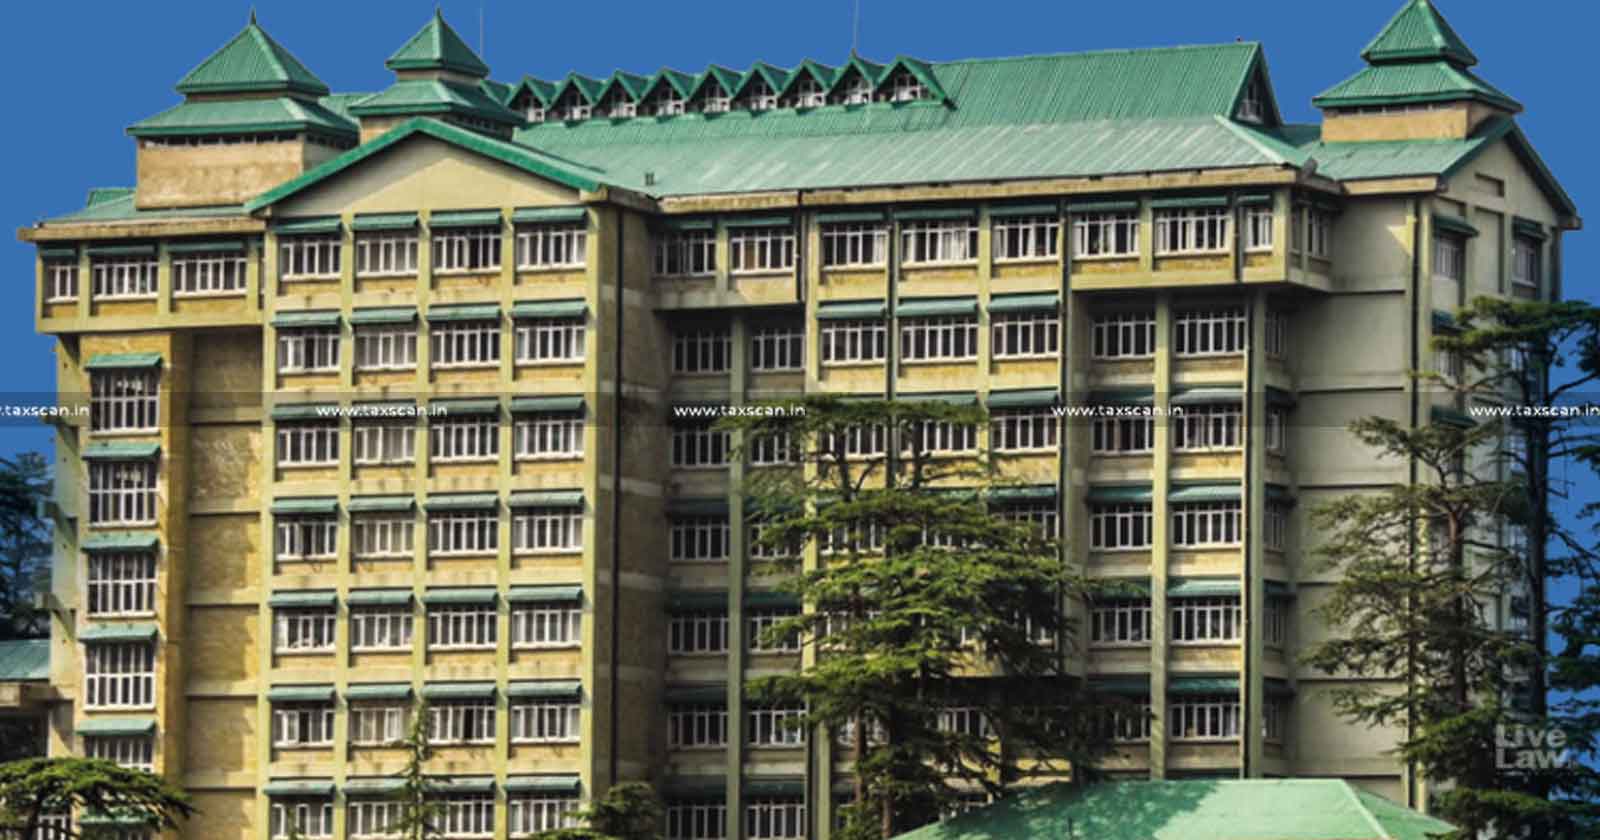 Excise - Taxation Department - raise - priority claim - charge over - Petitioner-Bank - Himachal Pradesh HC - taxscan